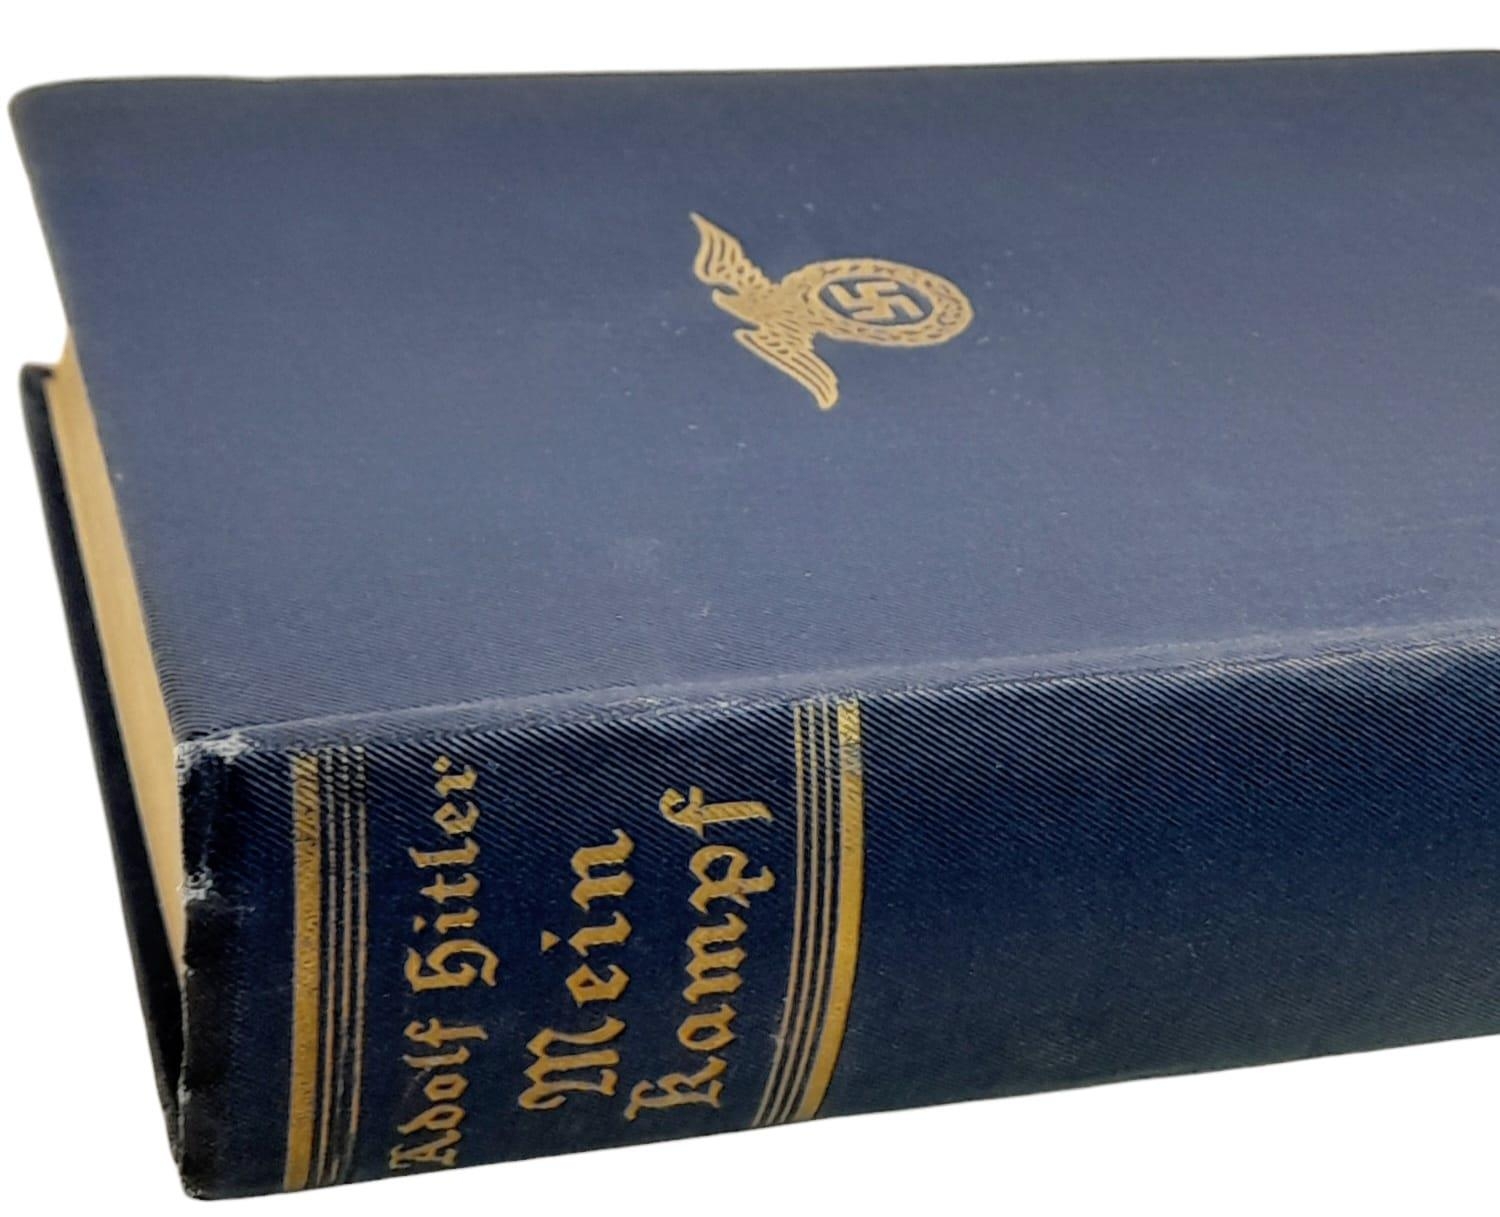 Hard Back ‘Adolf Hitler Mein Kampf’ Book. This is the English unexpurgated Edition Two Volumes in - Image 4 of 5